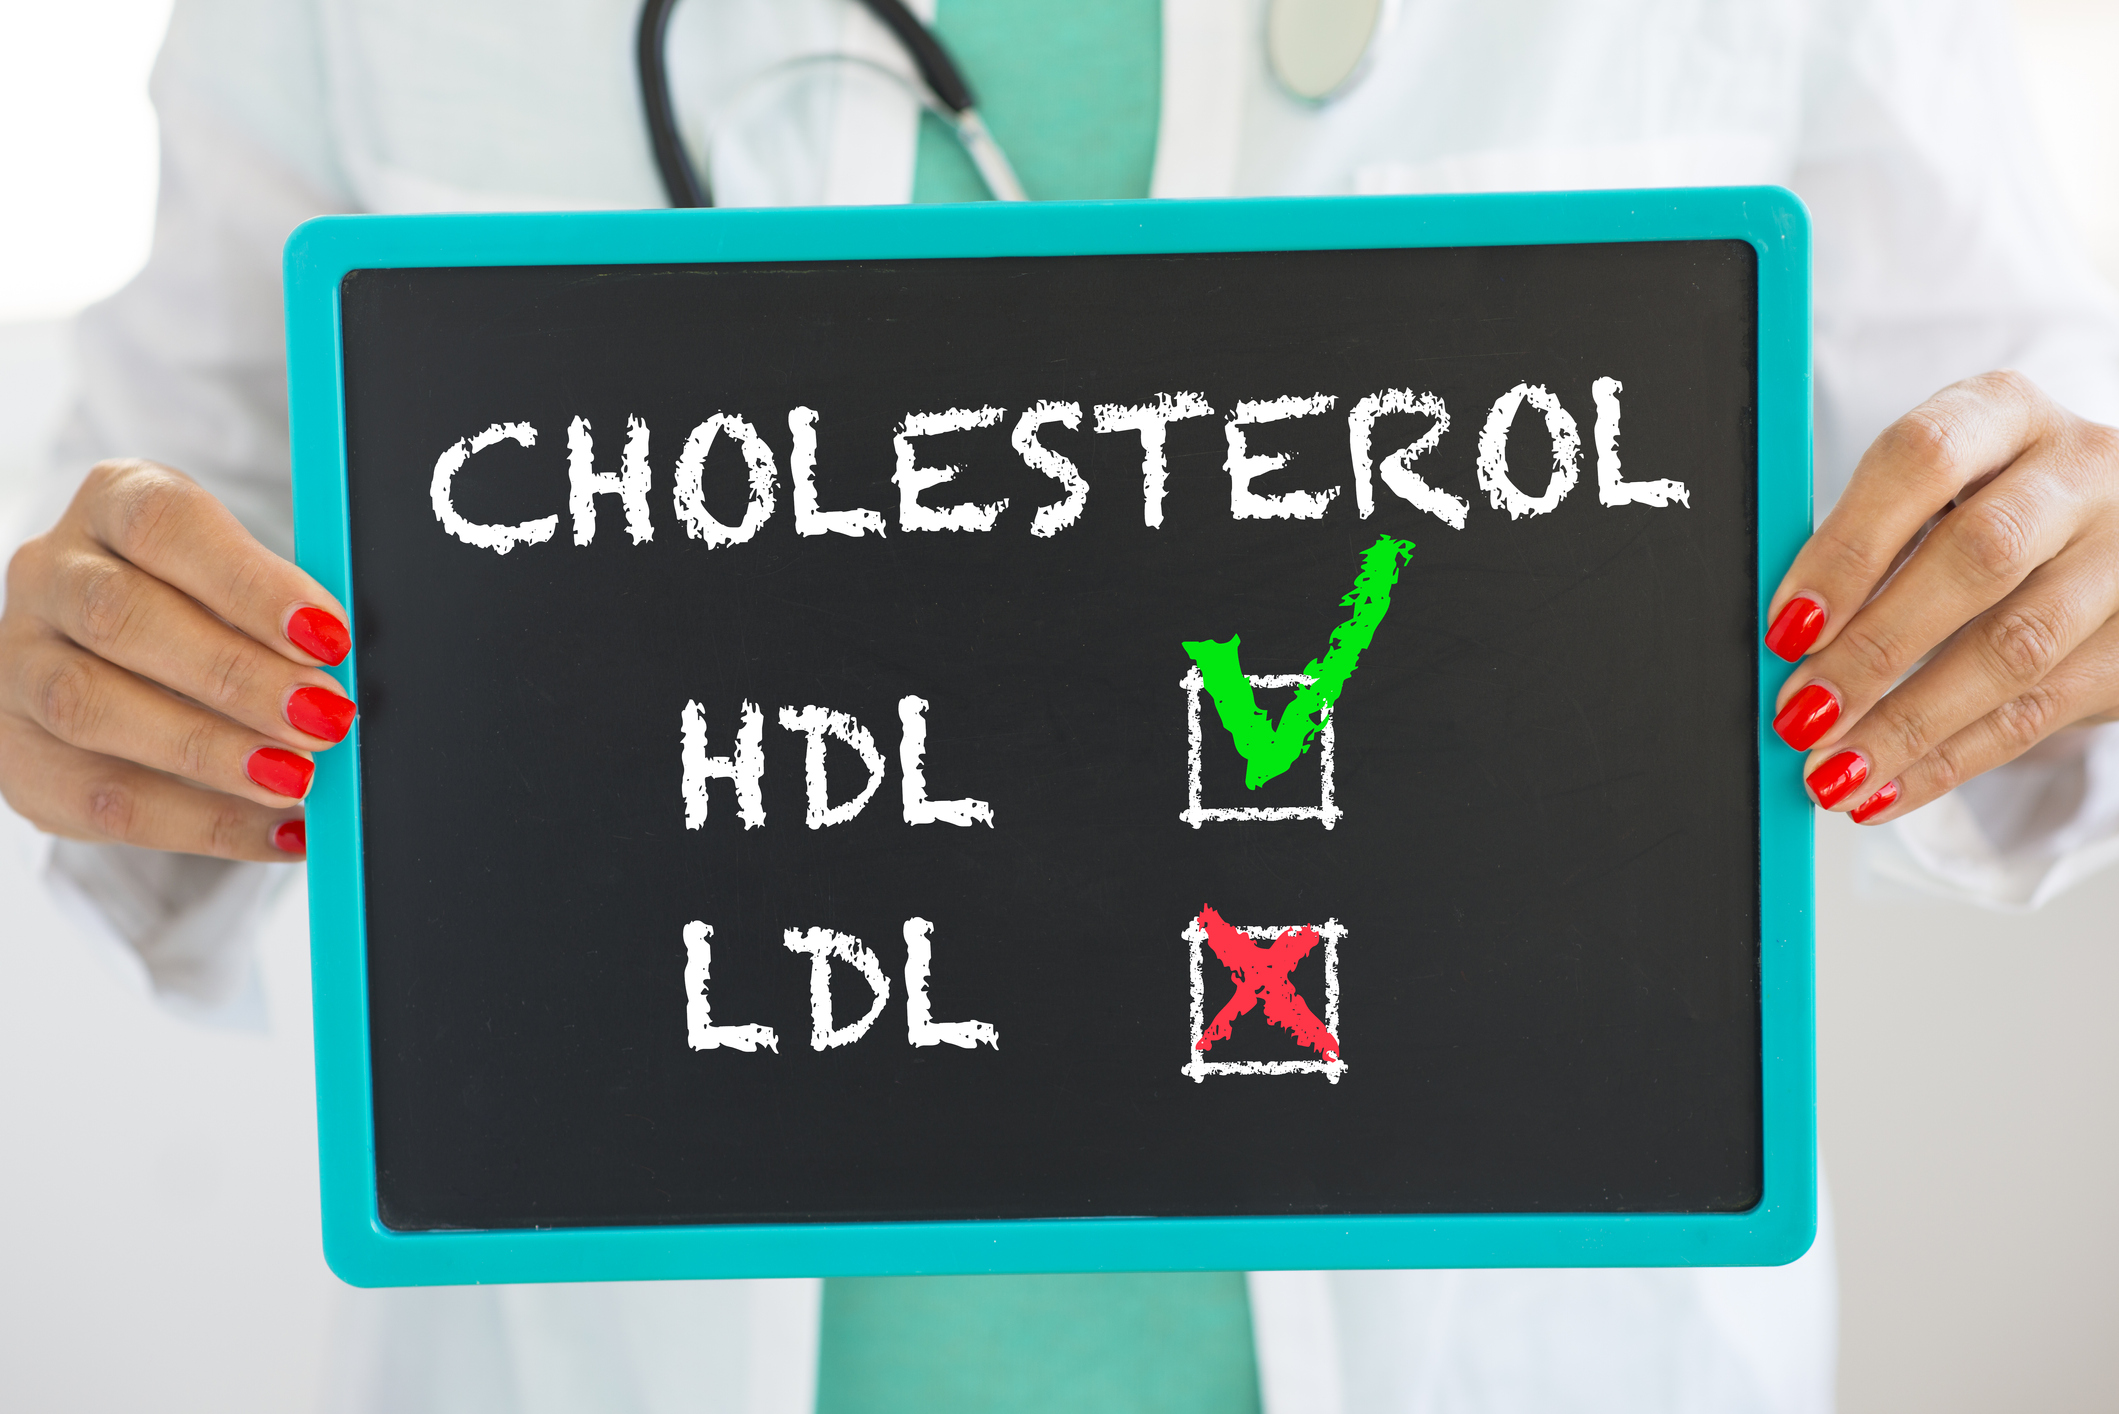 People with Higher HDL Cholester...